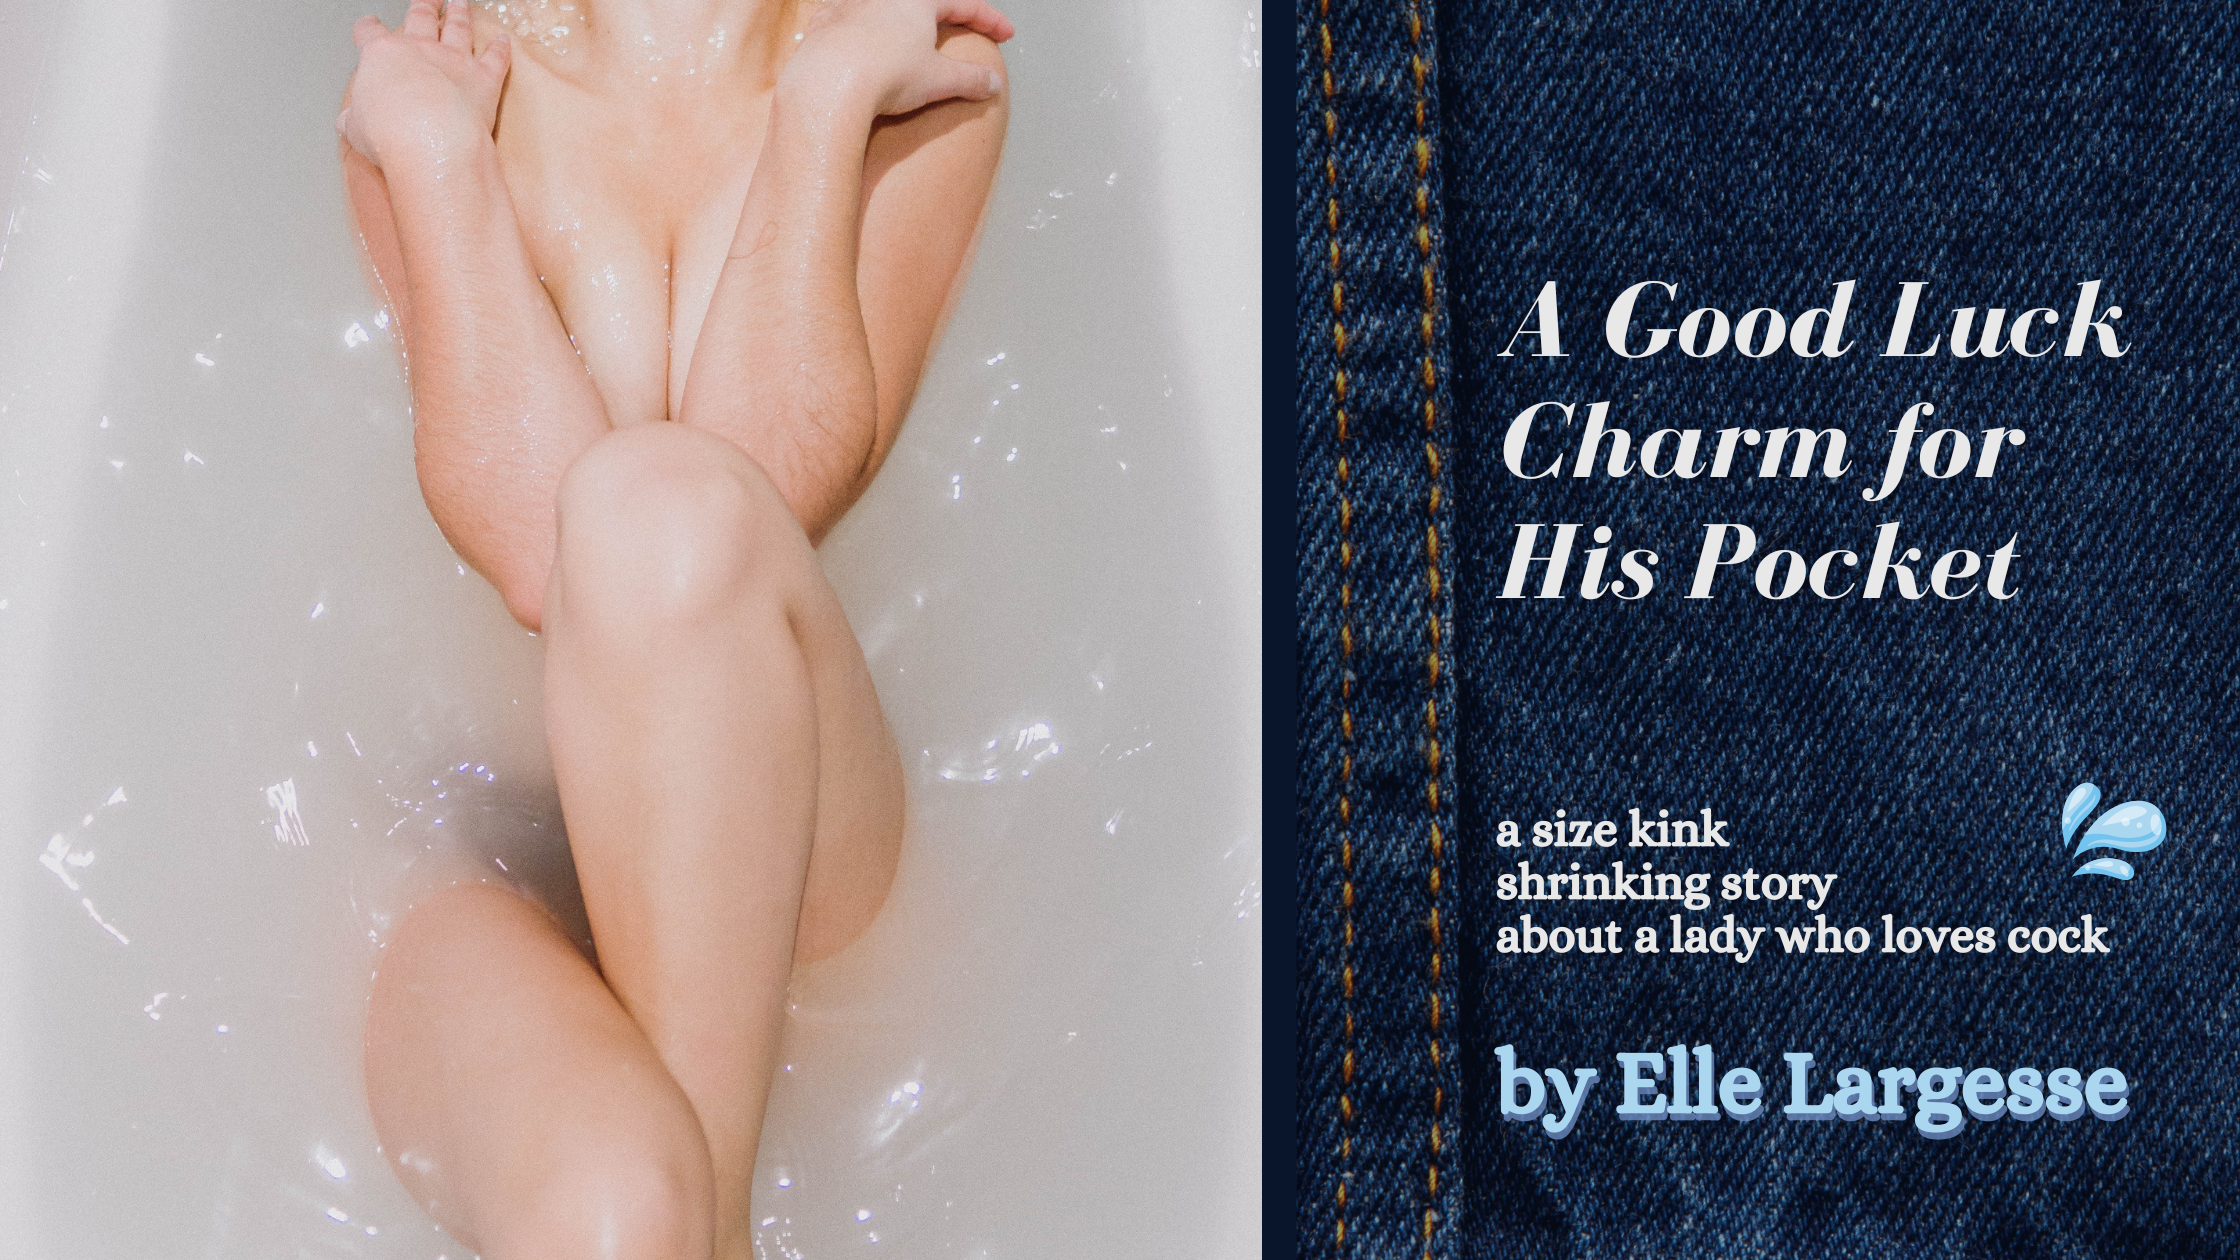 A woman reclines in milky white bath water, her hands on her shoulders pushing her breasts into cleavage, and her legs crossed alluringly. To the right, text over denim reads A Good Luck Charm for His Pocket, a size kink shrinking story about a lady who loves cock, by Elle Largesse. There's a water droplet emoji above "cock." Image credit to Rodolfo Sanches Carvalho.